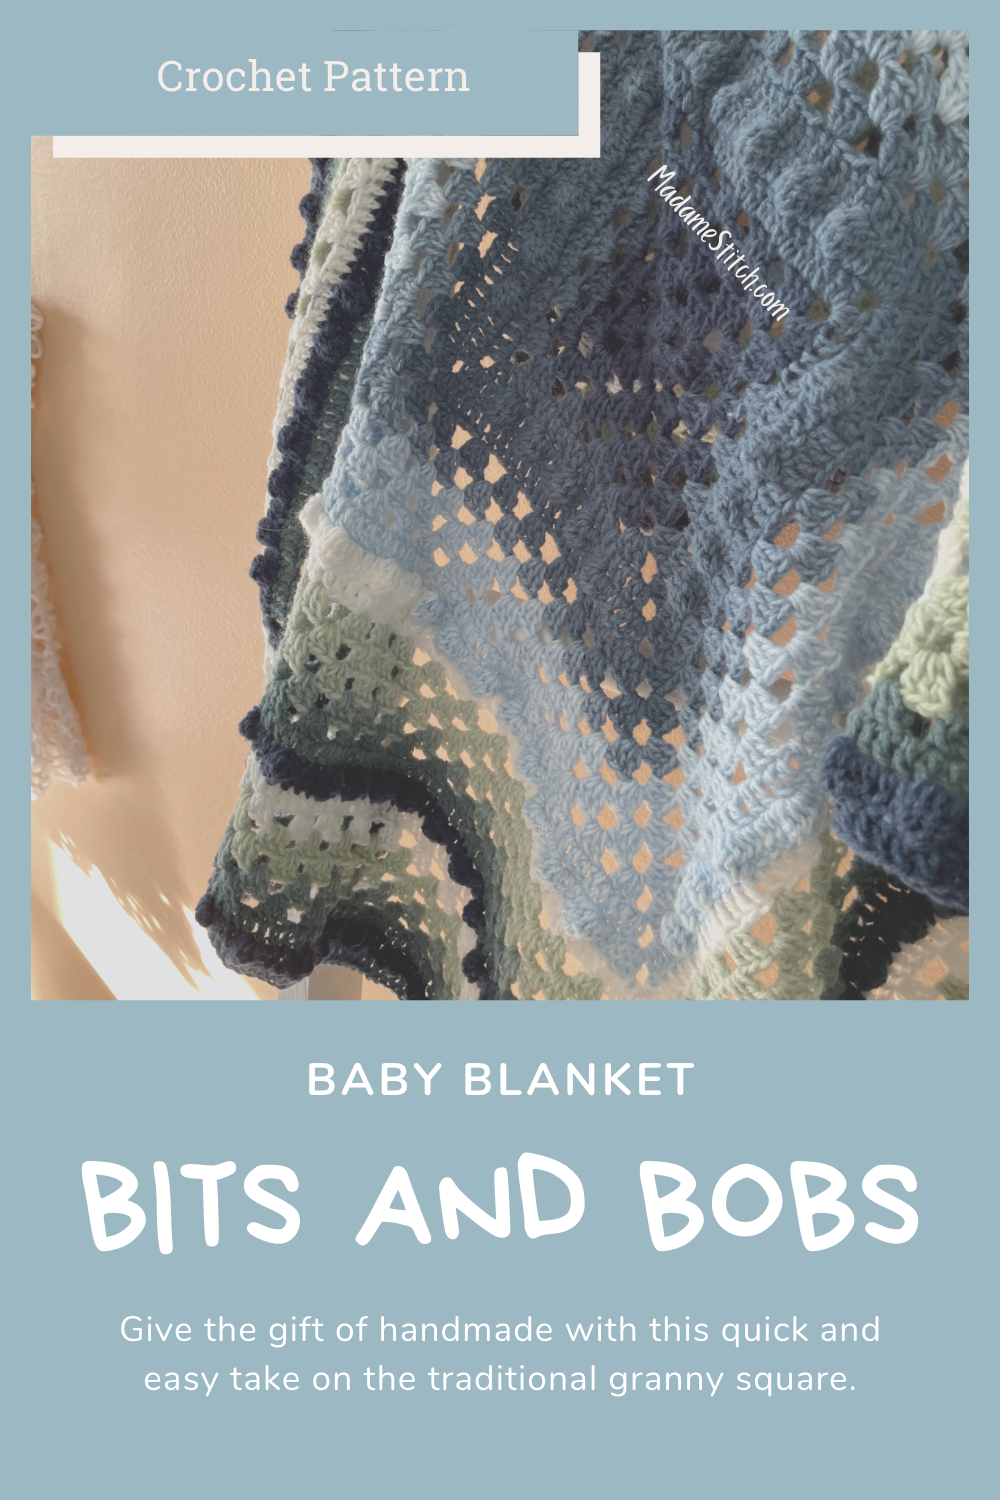 Pinterest pin of Bits and Bobs Baby Blanket crochet pattern by MadameStitch